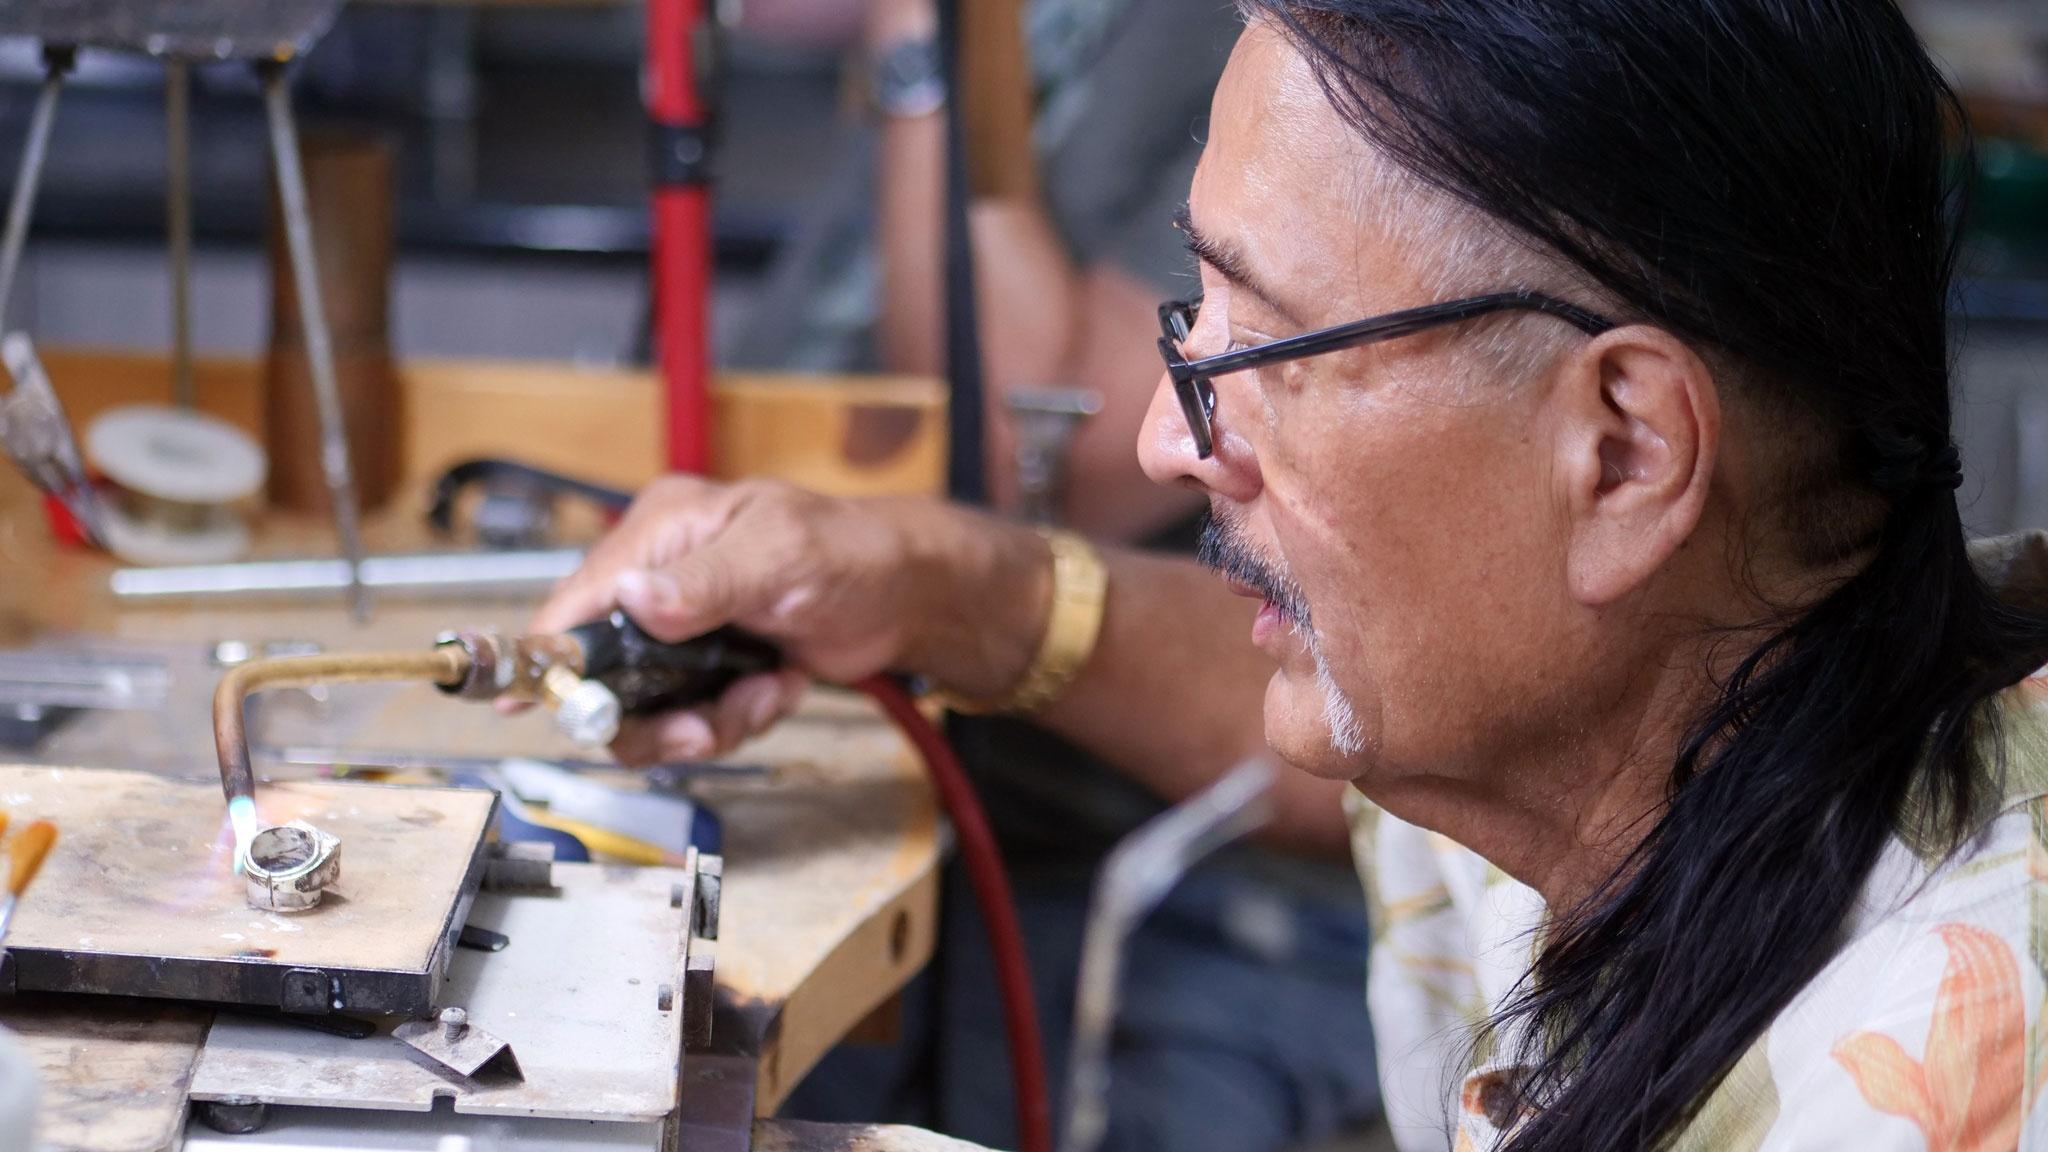 Navajo/Hopi jewelry artist Jesse Monongya torches silver at his jeweler's bench